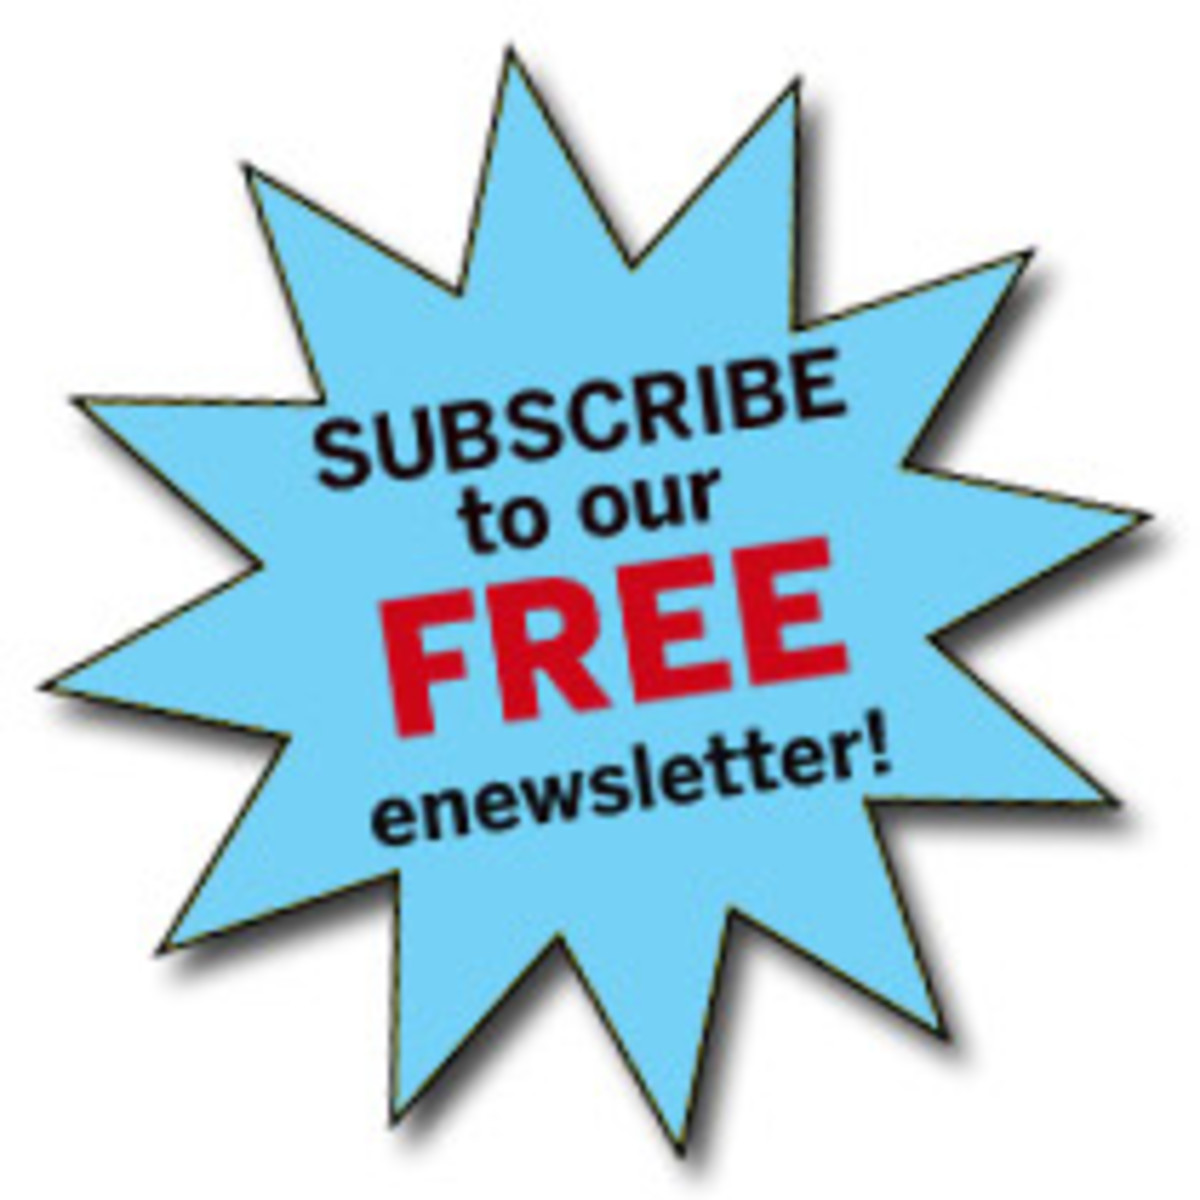 Subscribe to our FREE newsletter